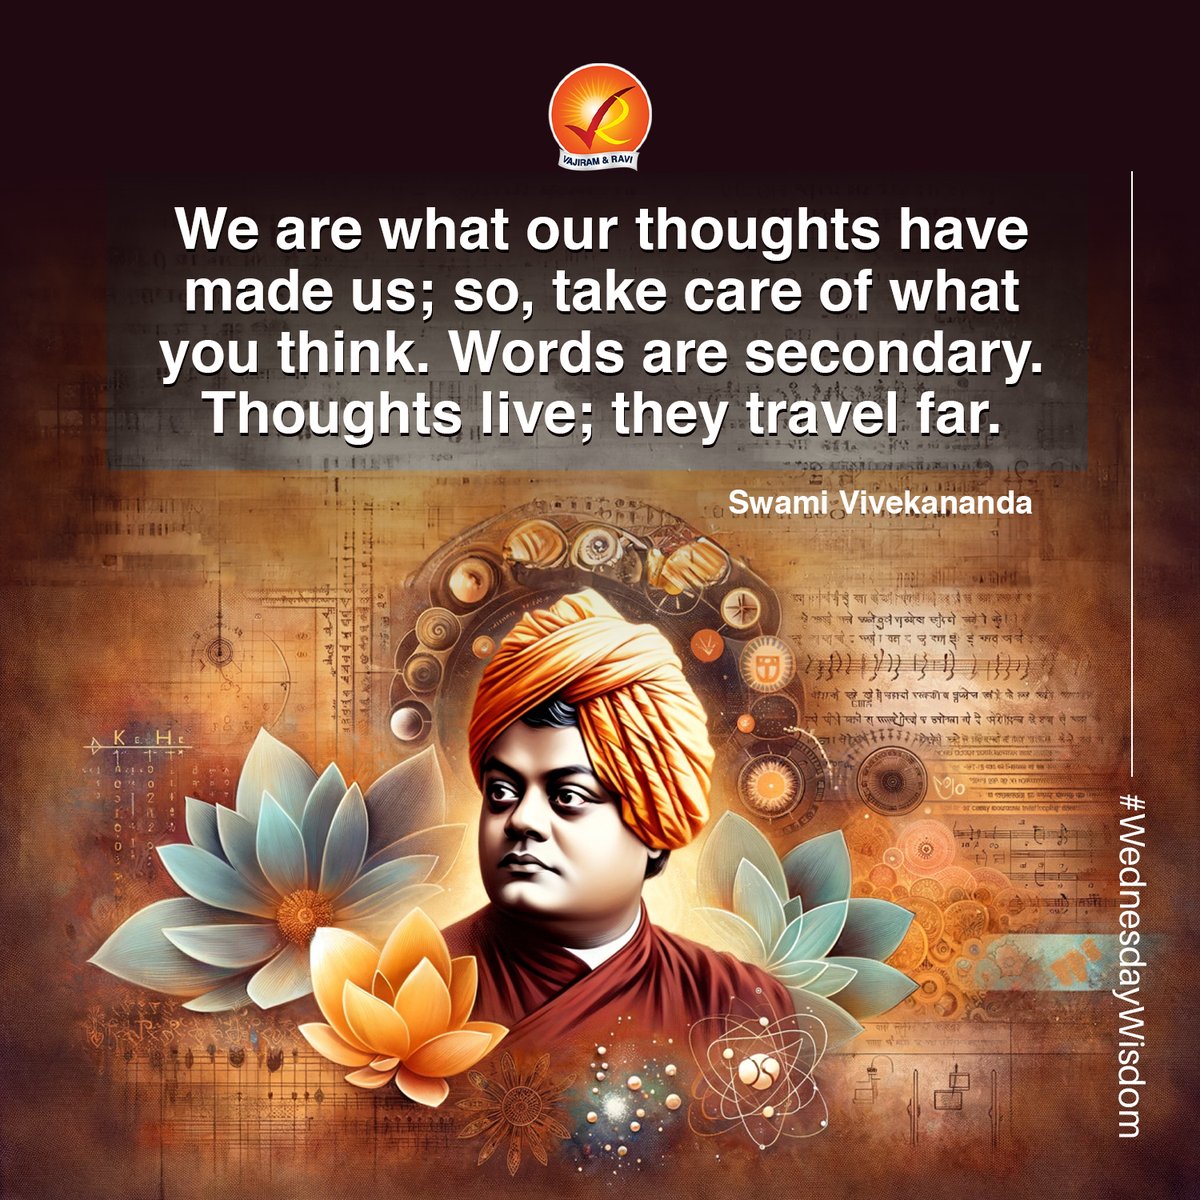 We are what our thoughts have made us; so, take care of what you think. Words are secondary. Thoughts live; they travel far.

#WednesdayWisdom 💡 |  #wellnesswednesday #motivationday #motivation #motivationeveryday #wisdom #wisdomquotes #wordsofwisdom #happiness #inspiration